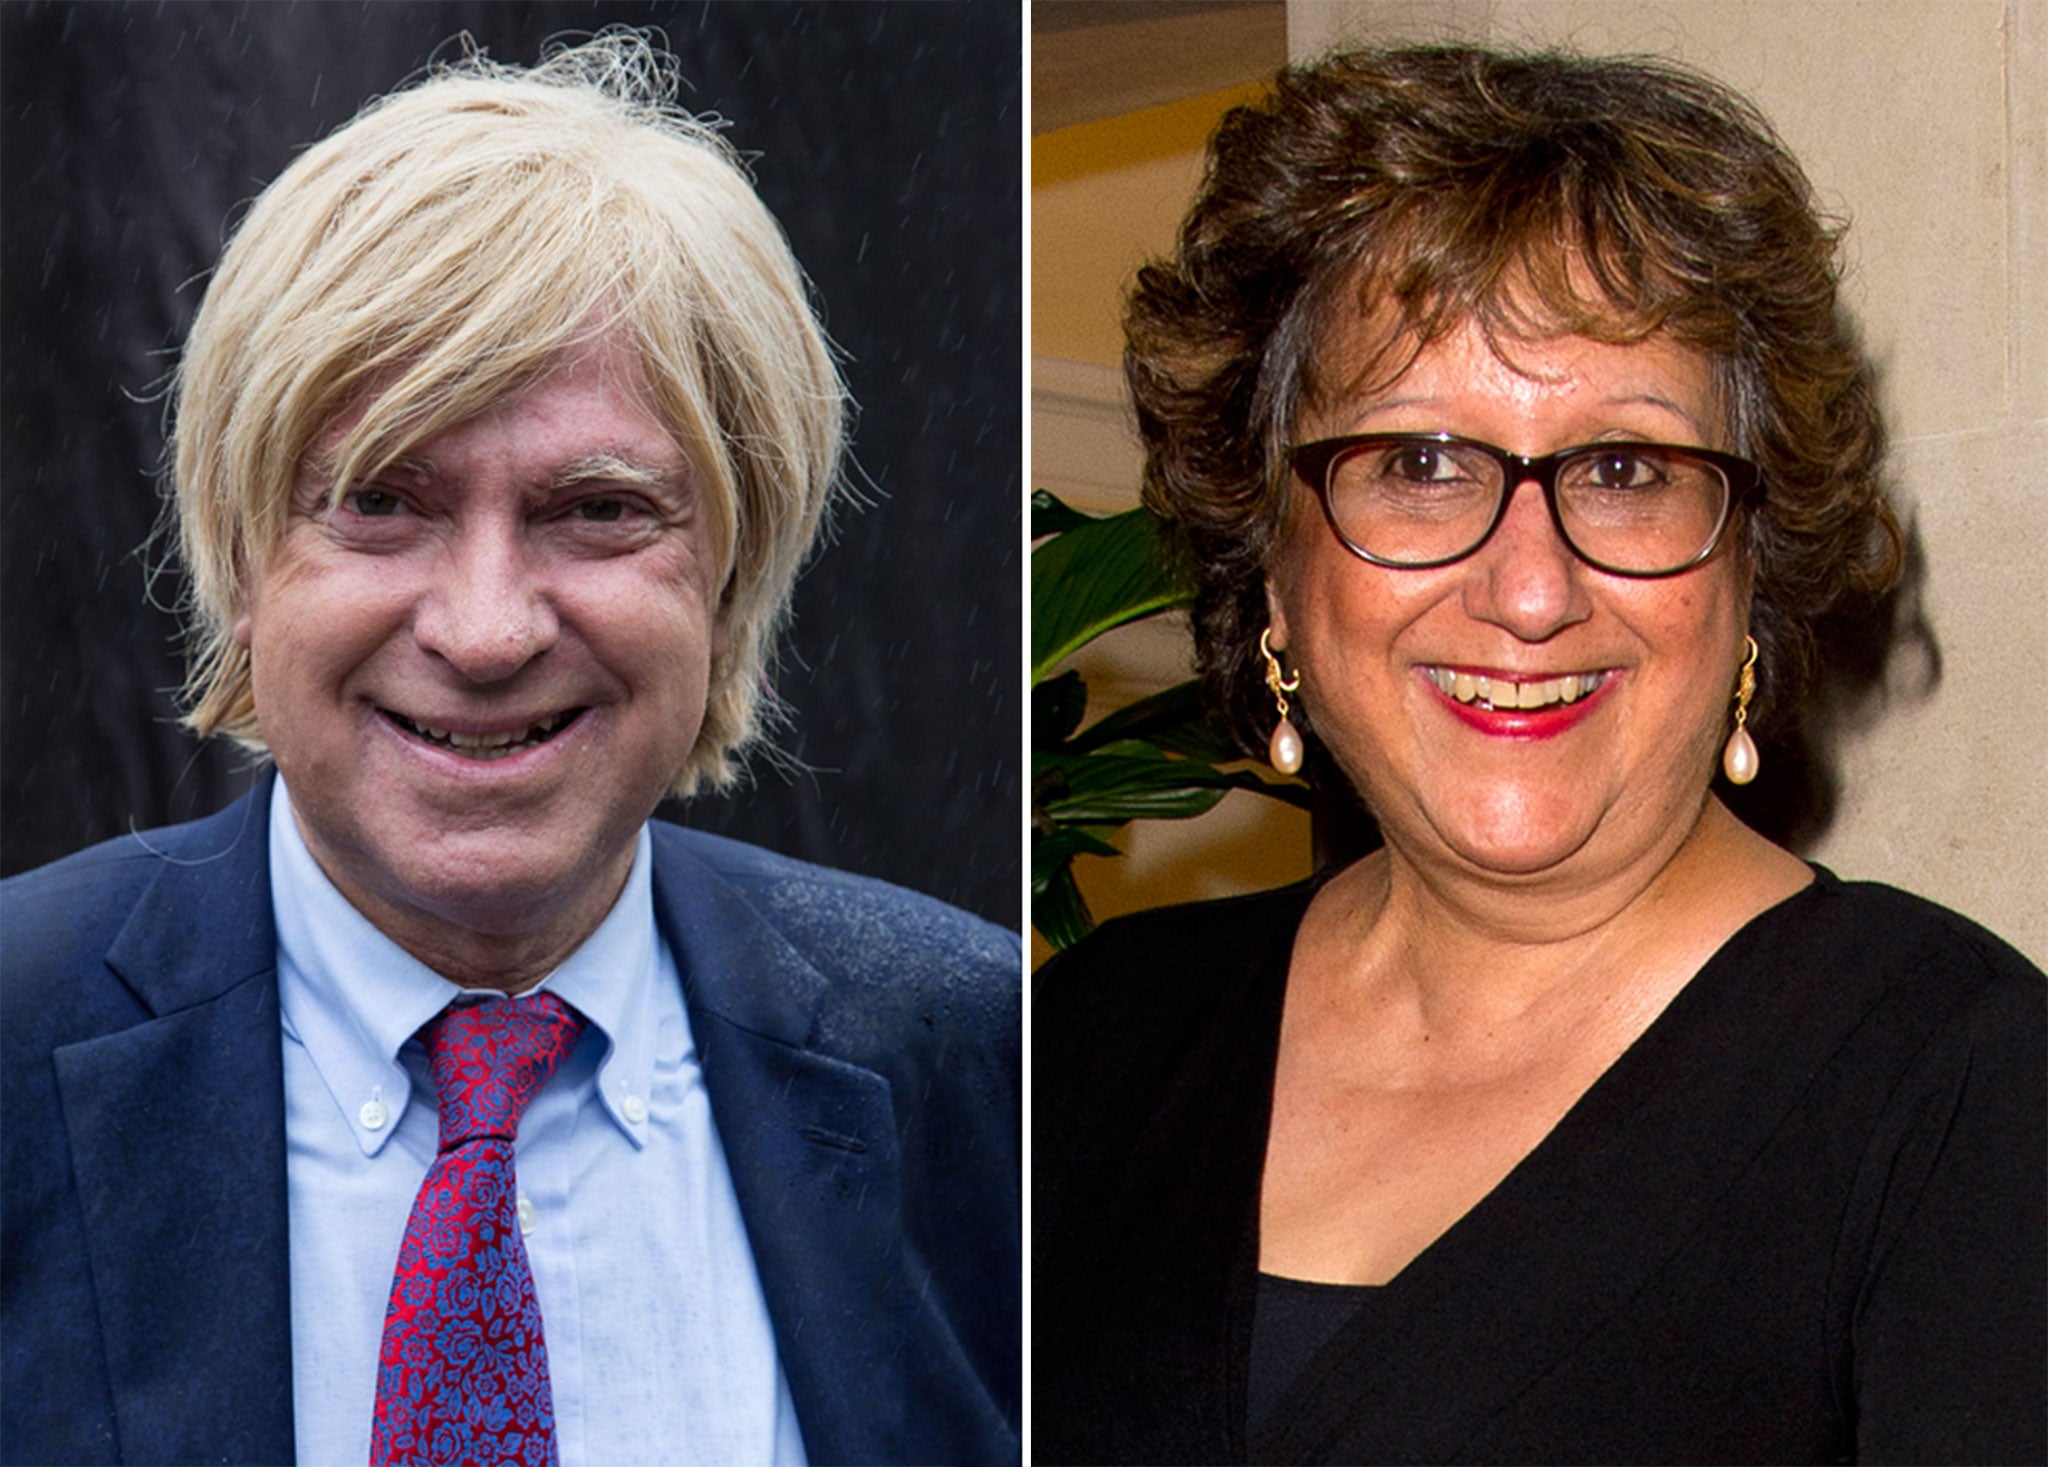 Yasmin Alibhai-Brown has called on Michael Fabricant to resign after the Conservative MP tweeted that he would end up “punching her in the throat” if he were ever to appear on a discussion programme with her.